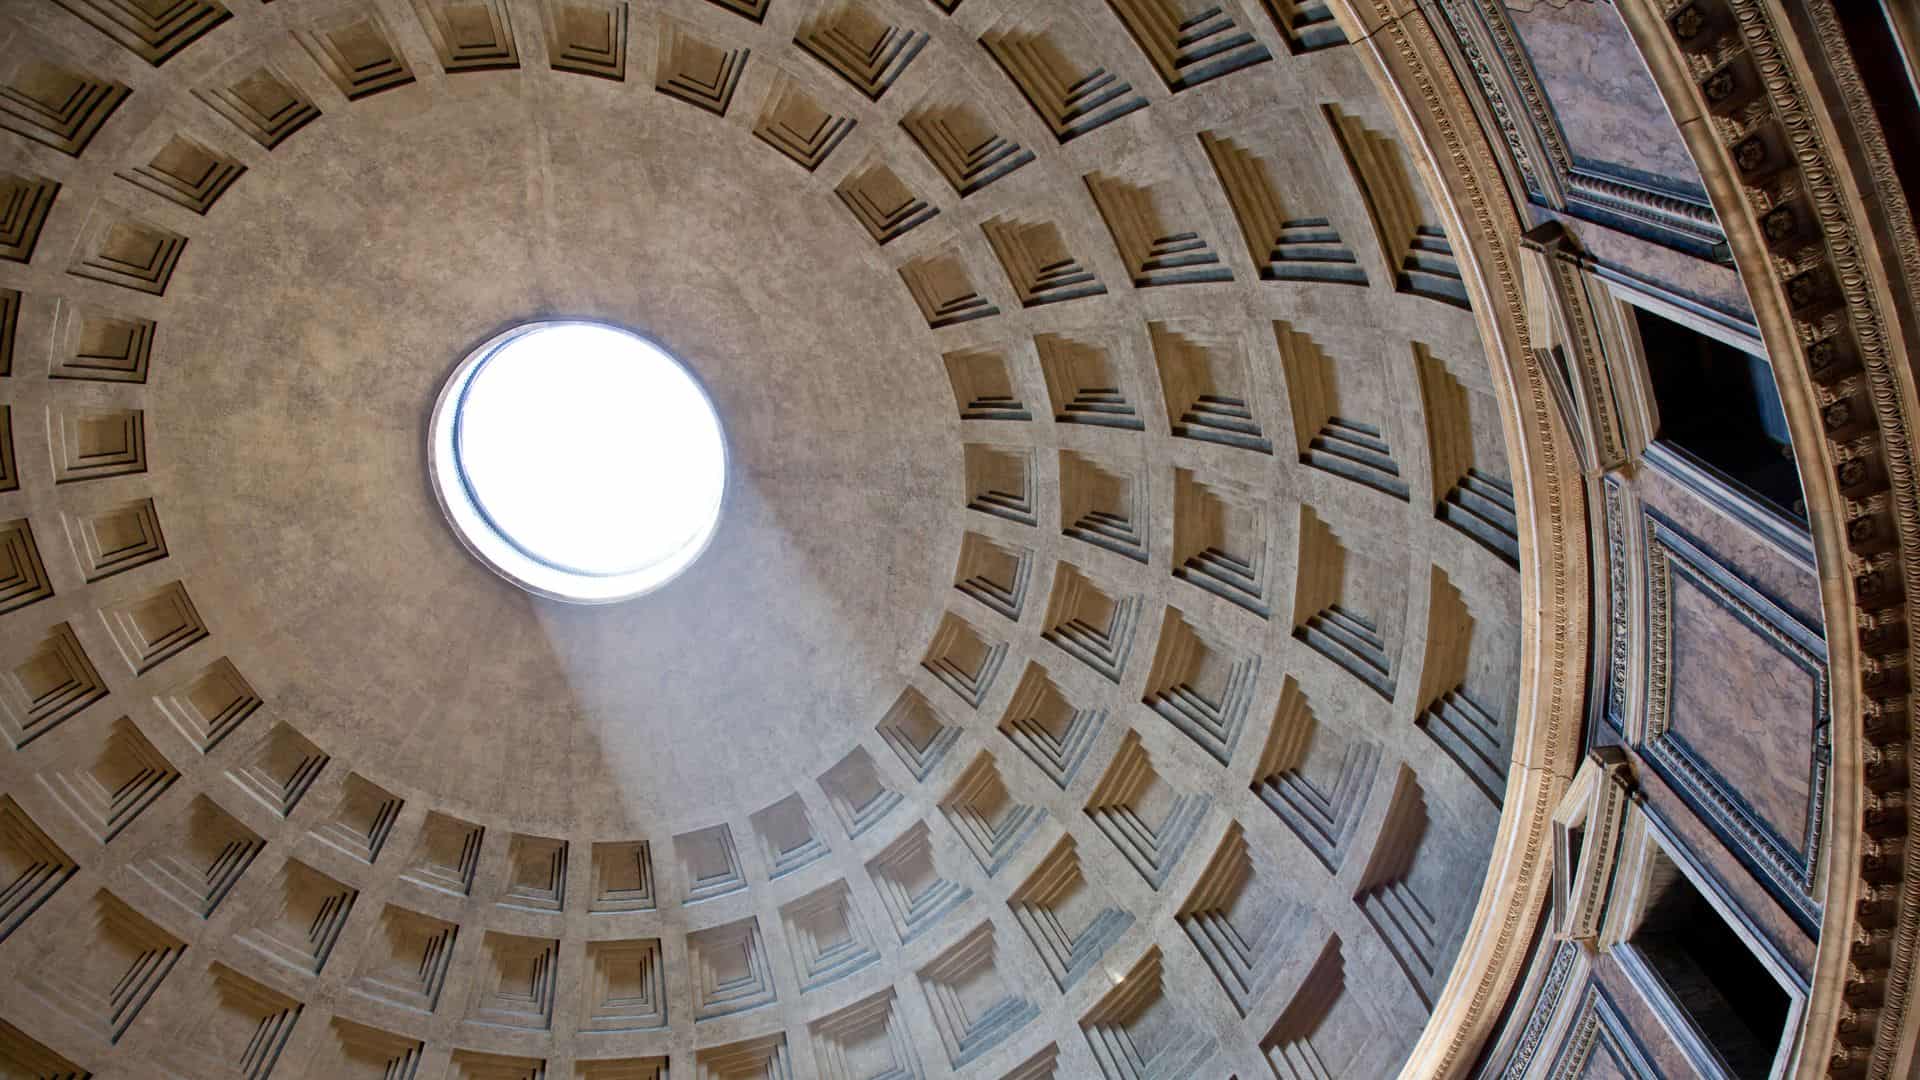 A ray of light passes through the oculus in the Pantheon's dome.